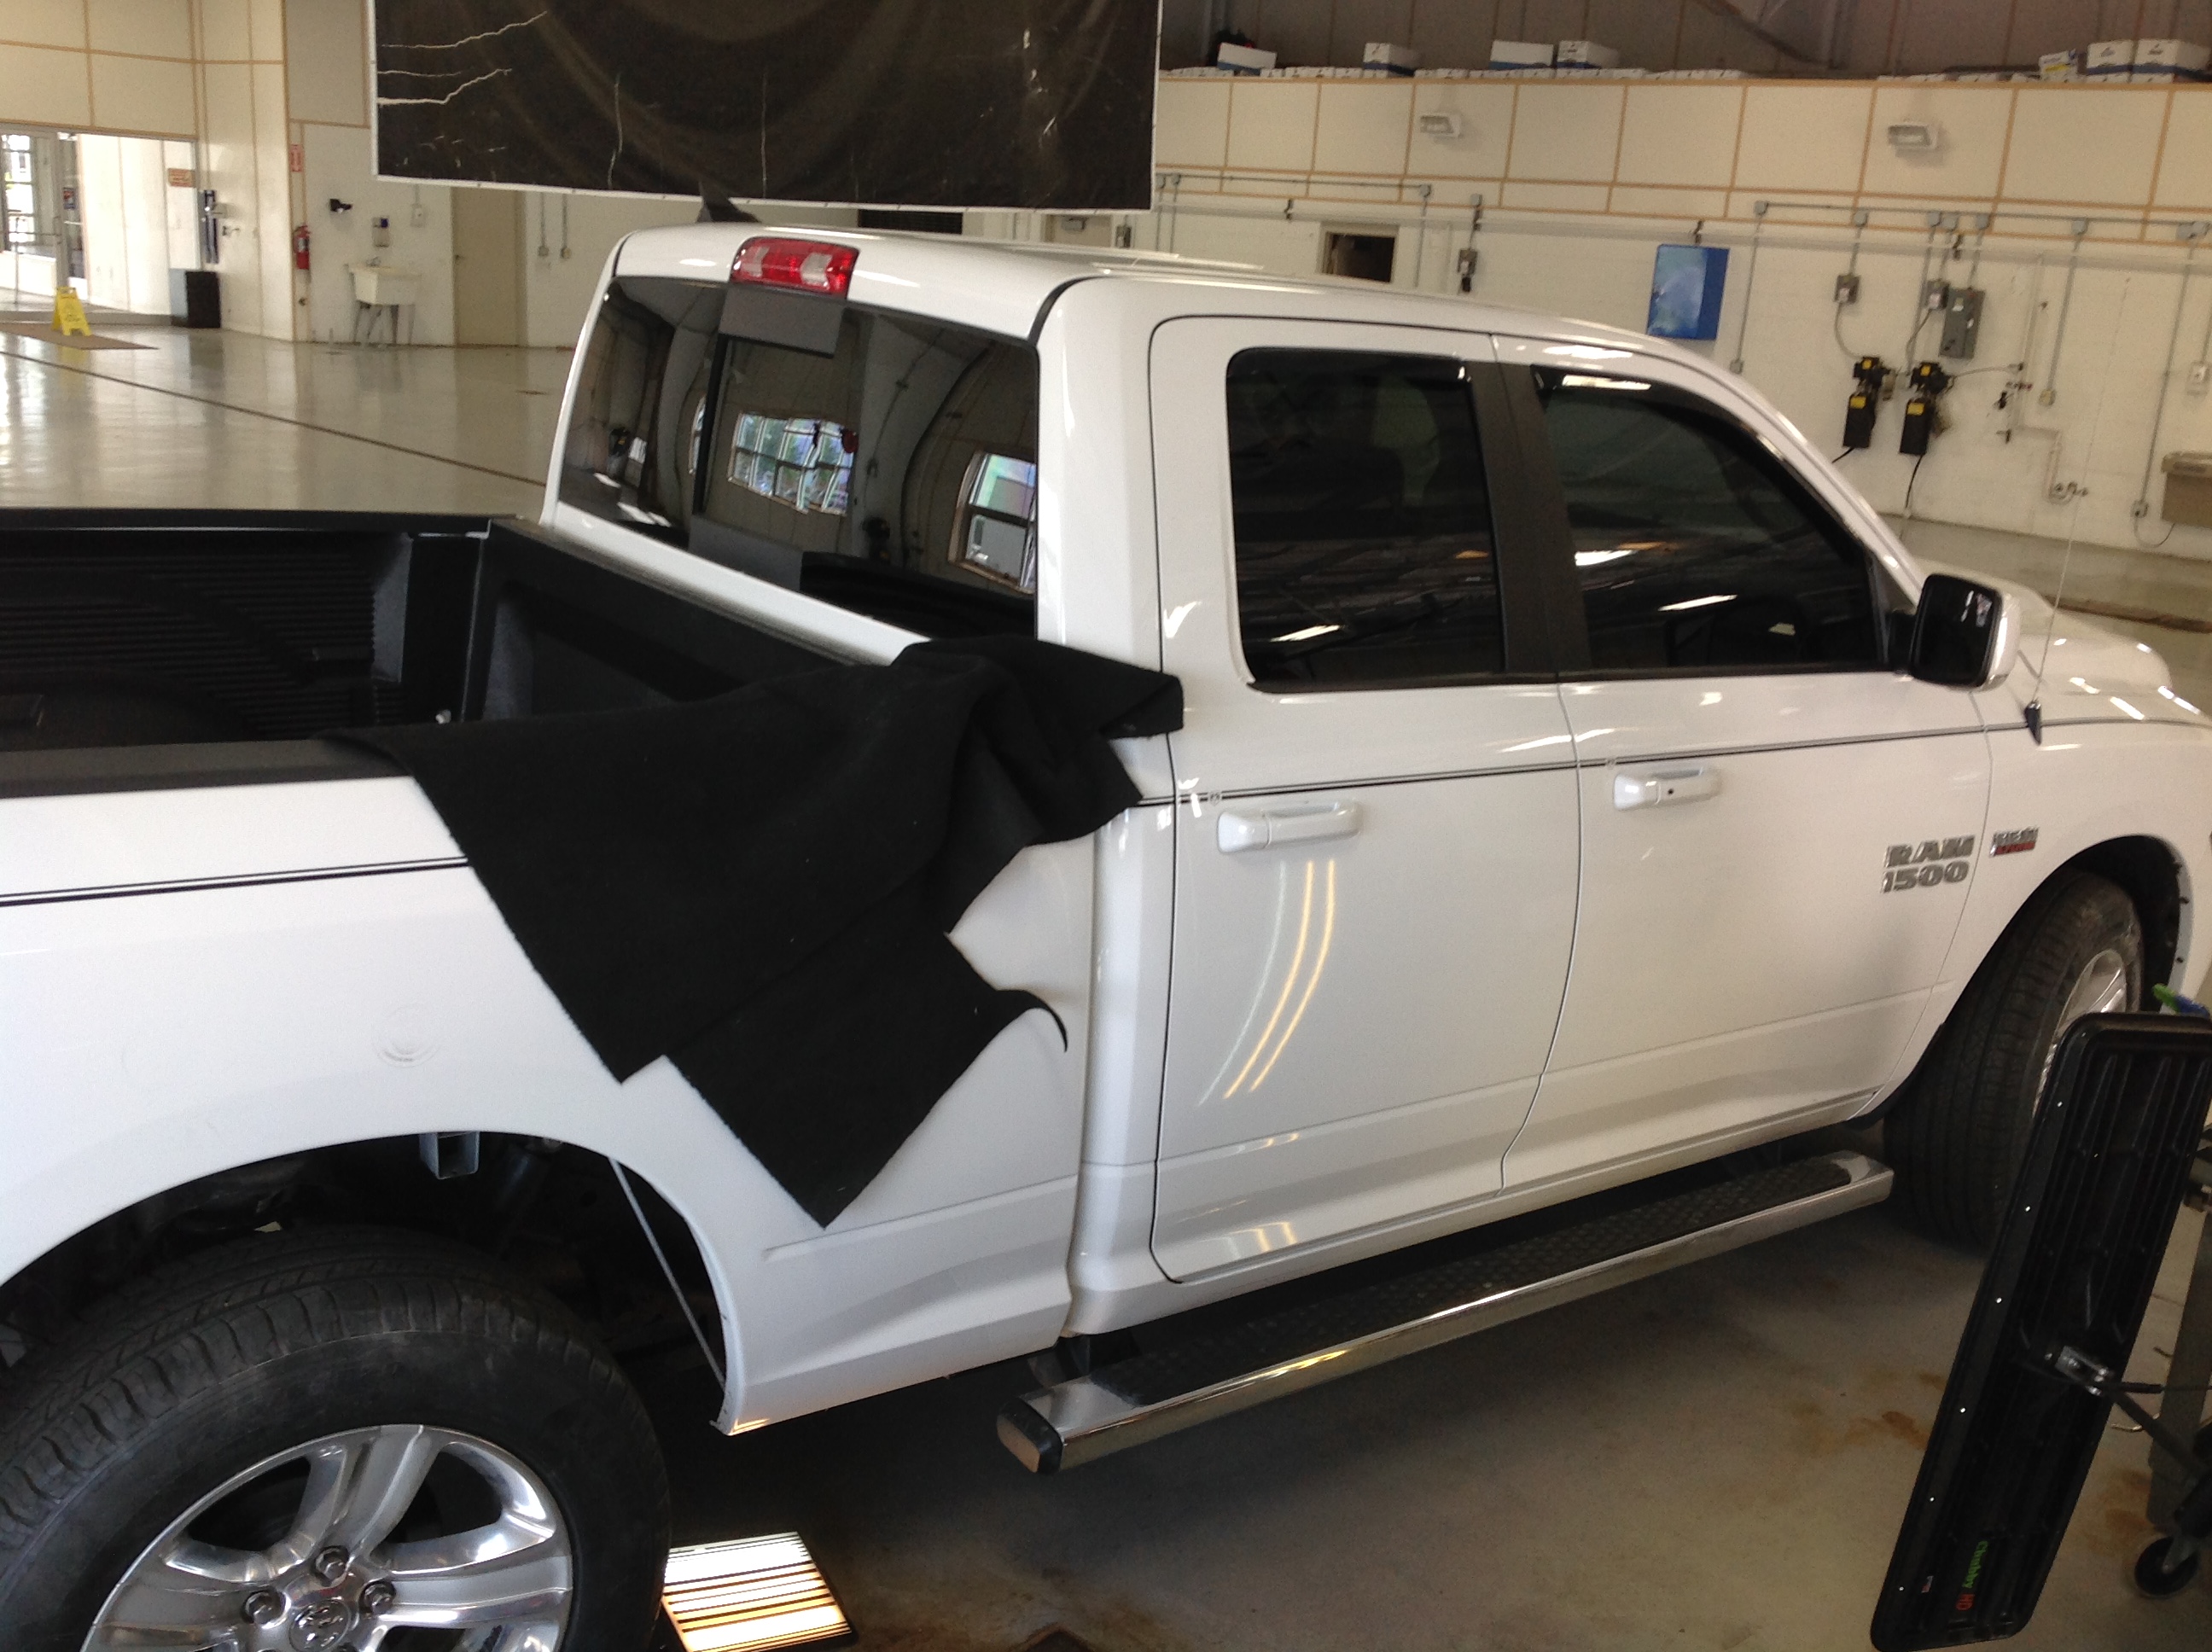 2014 White Ram 1500. removal of rear inner wheel well. For Pdr access. For more information about "paintless dent removal" contact Michael Bocek at 217dent.com.